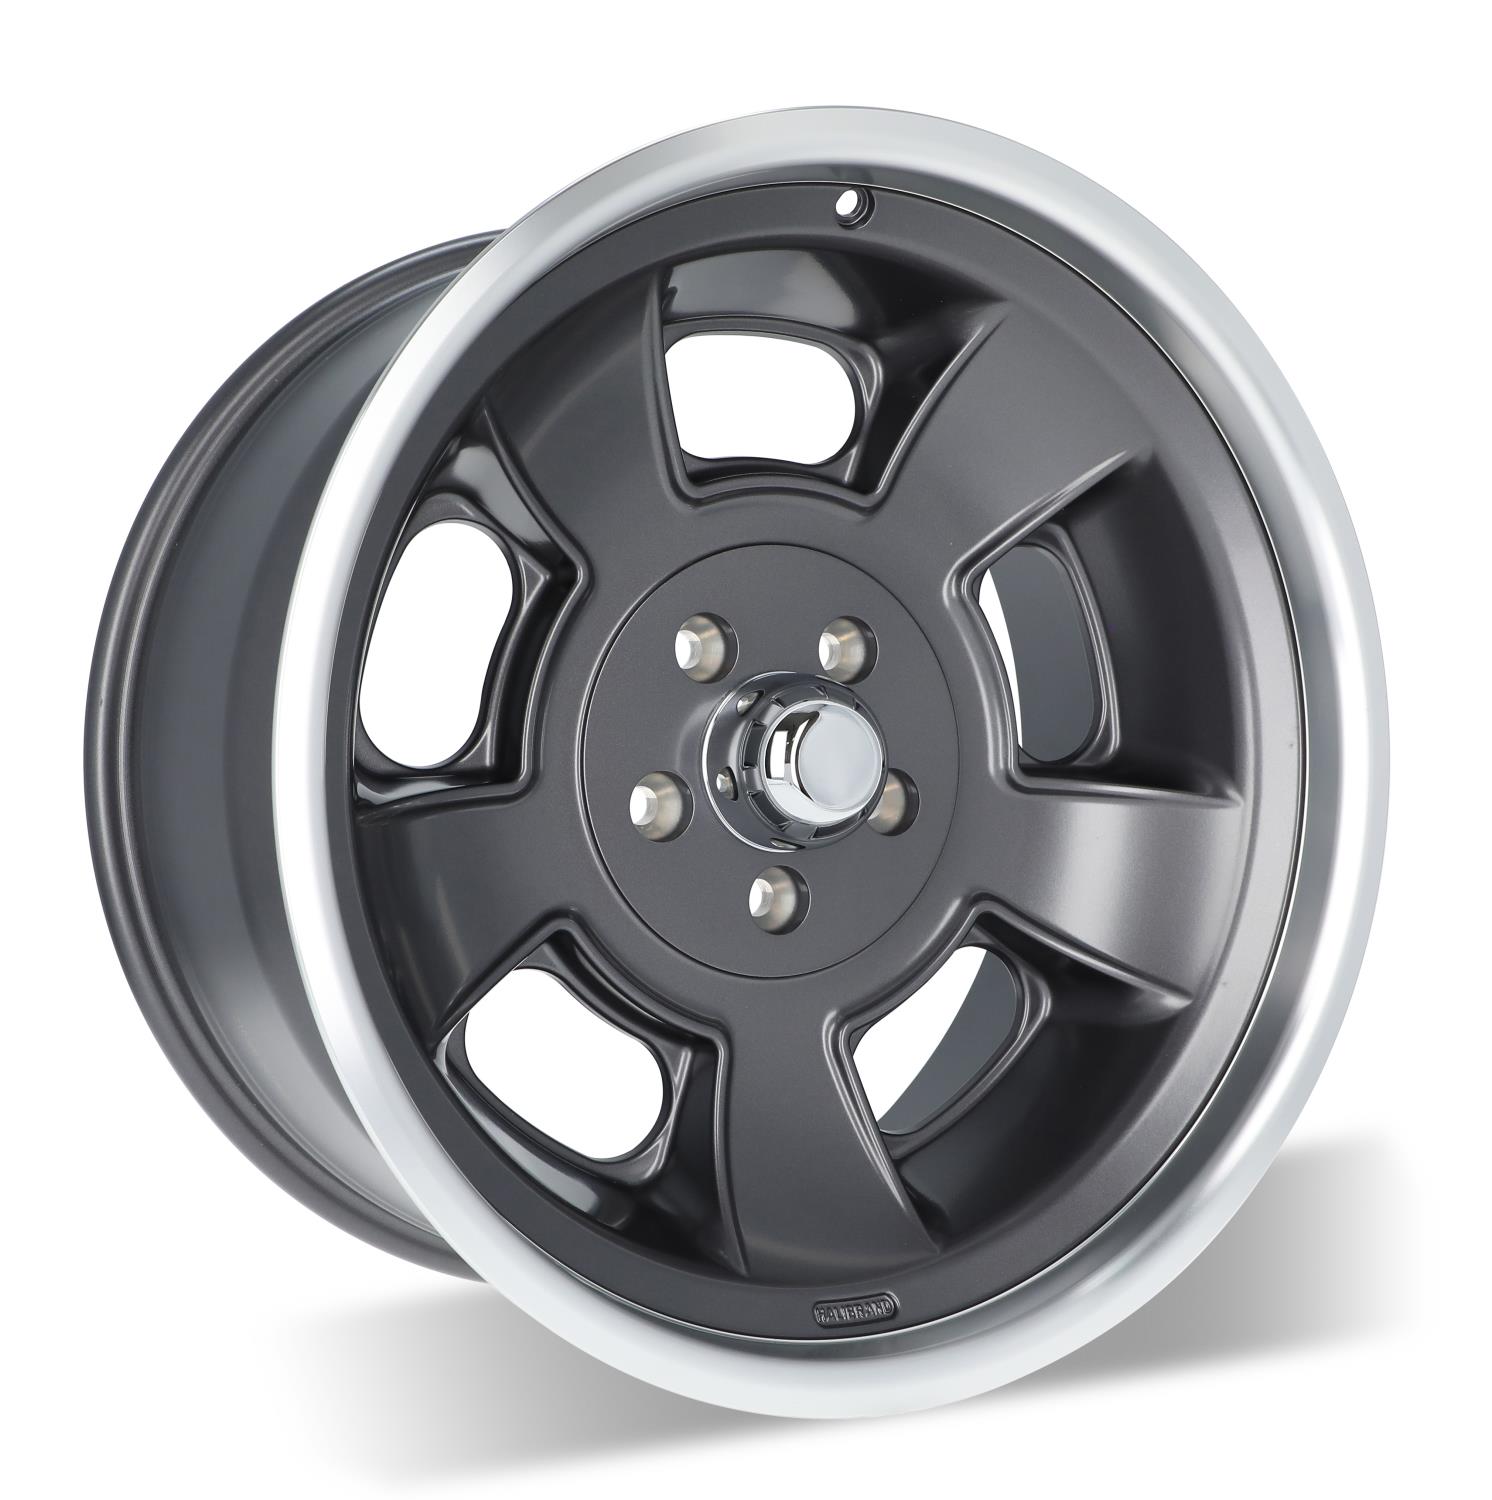 Sprint Rear Wheel, Size: 20x10", Bolt Pattern: 5x5", Backspace: 5.5" [Anthracite with Machined Lip - Semi Gloss Clearcoat]